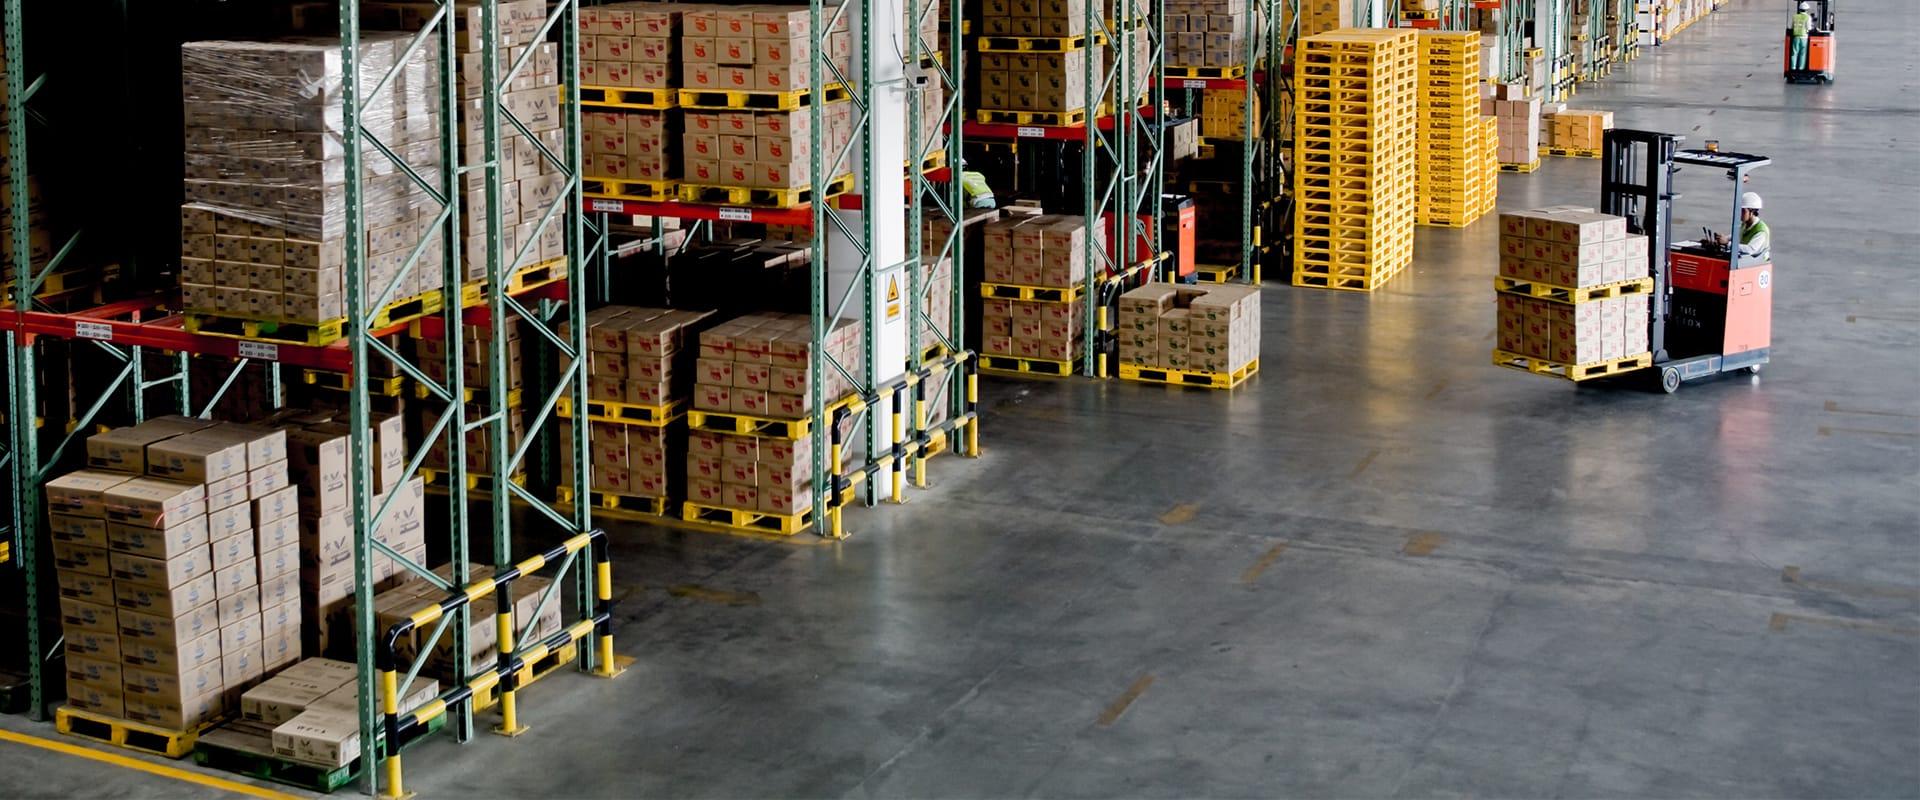 interior of a large warehouse in columbia south carolina